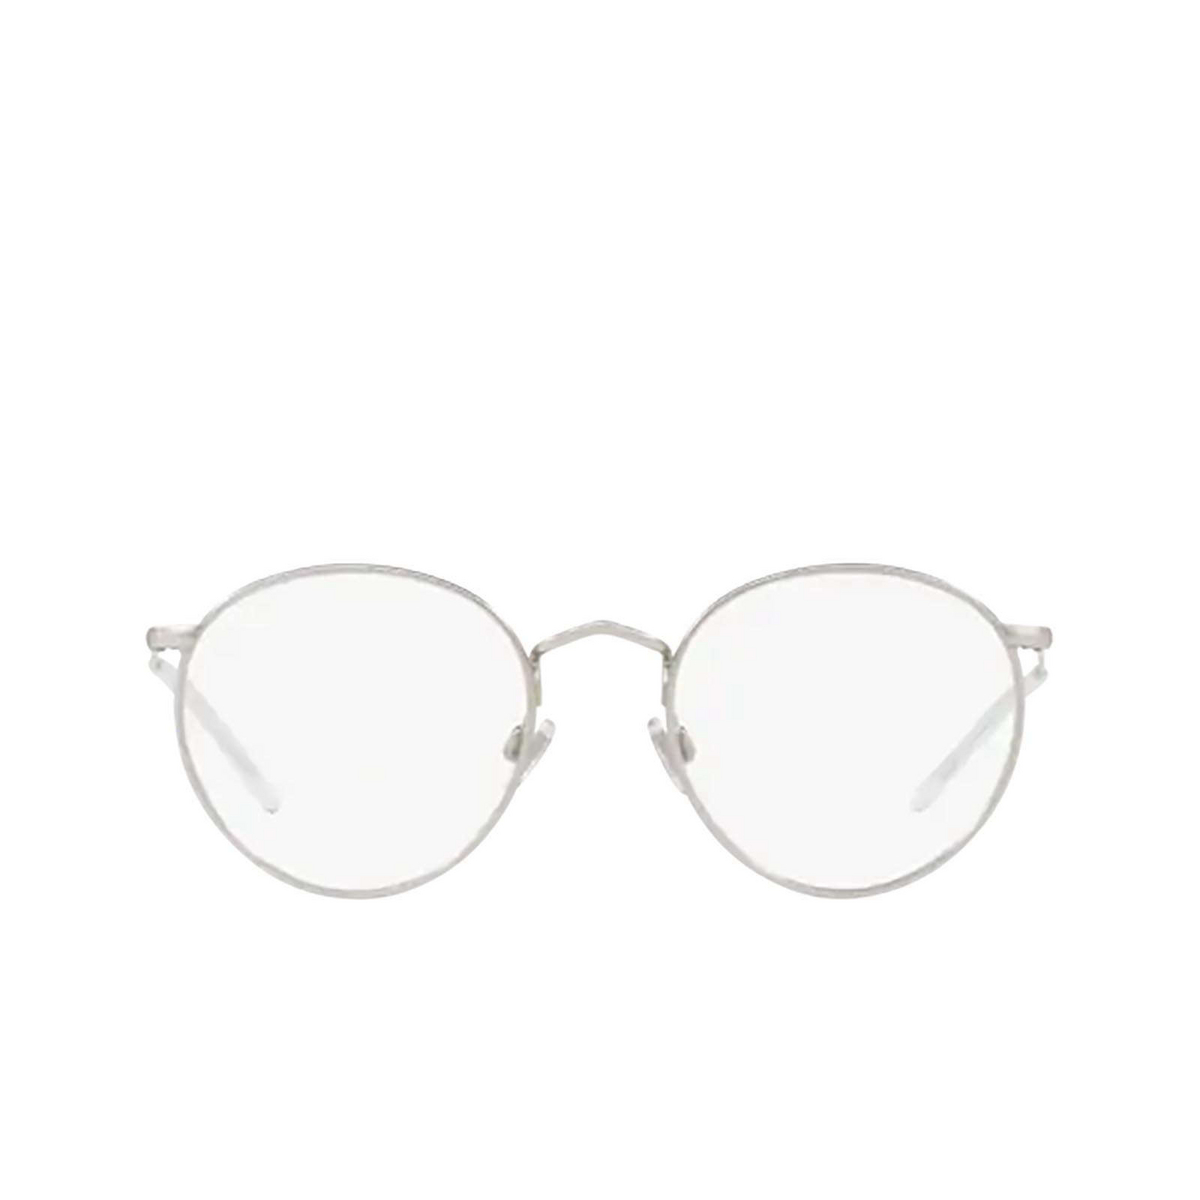 Polo Ralph Lauren® Round Eyeglasses: PH1179 color Semi-shiny Brushed Silver 9326 - front view.